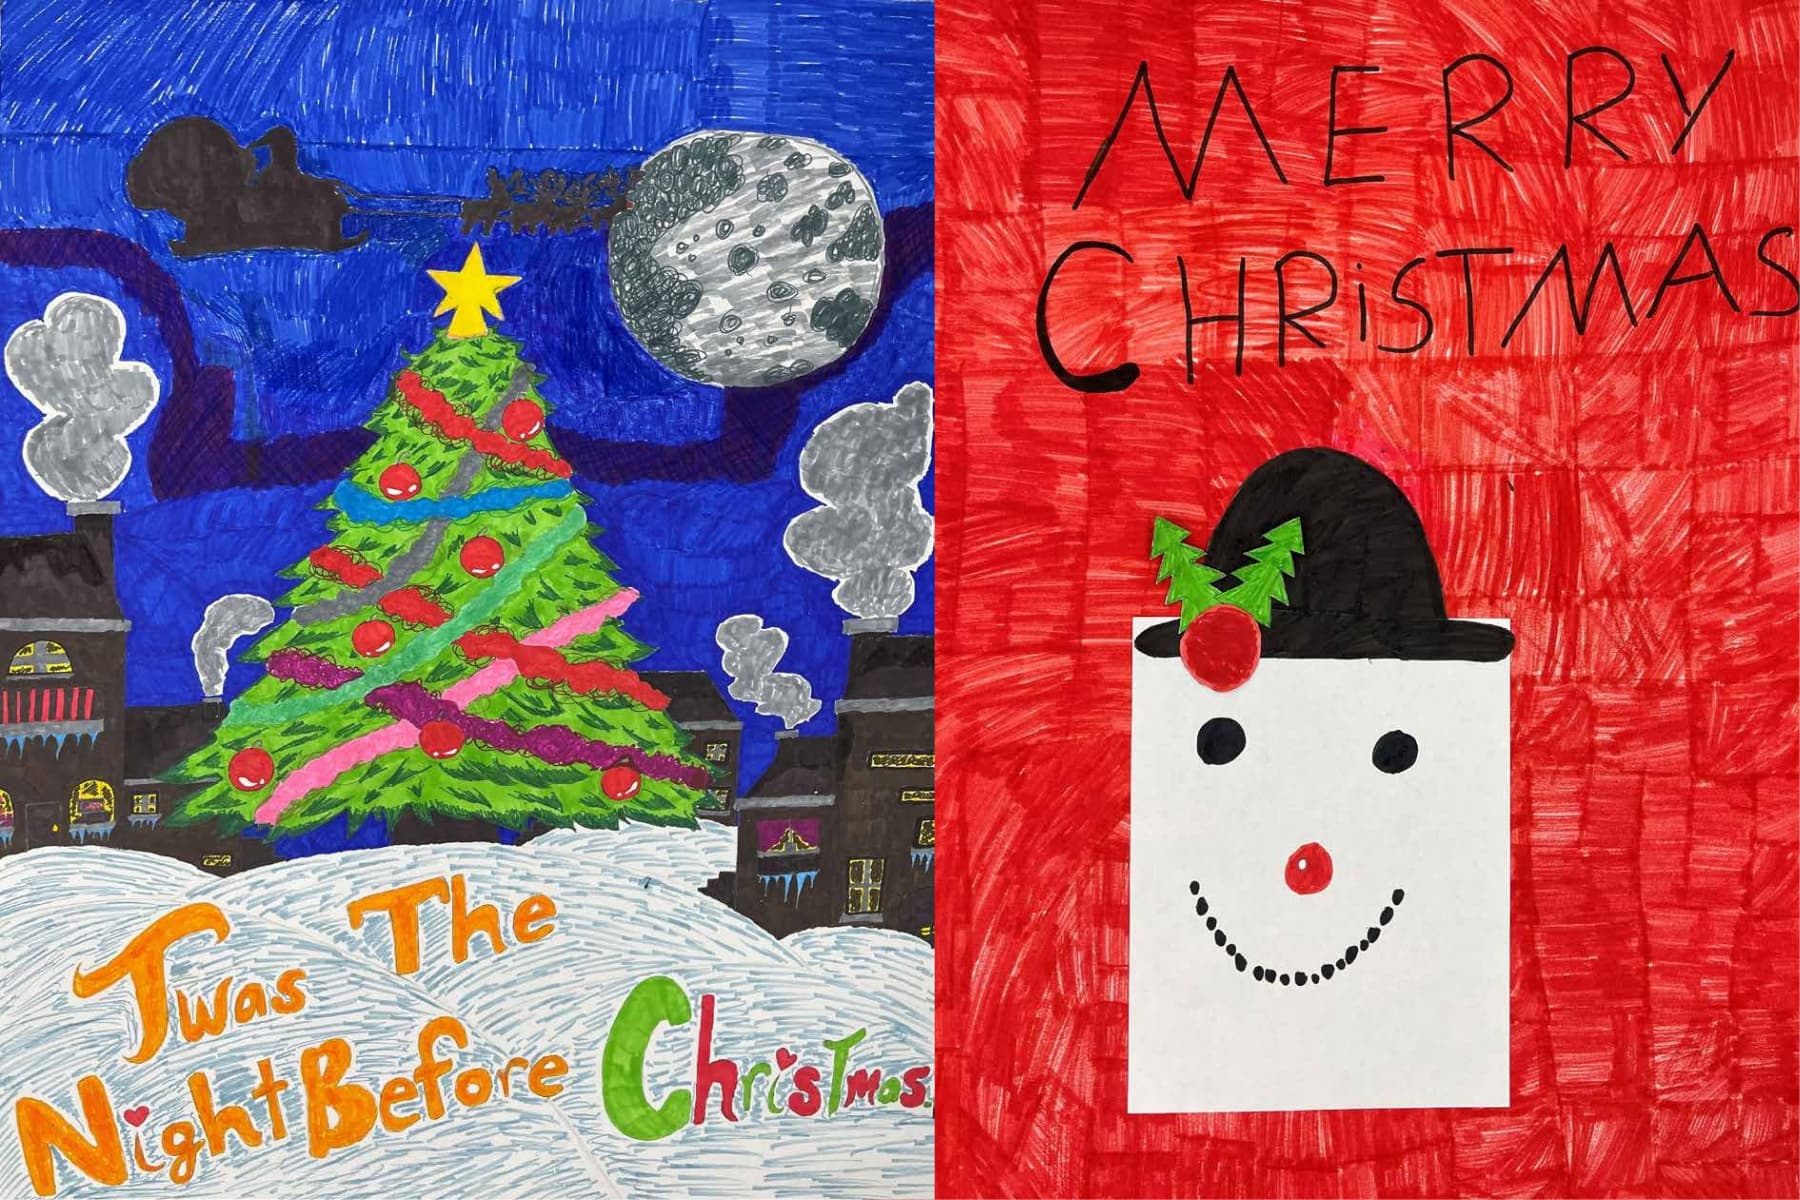 Holiday drawings of a Christmas tree and a snowman created by Margari and Jayla from Great Oaks Village.